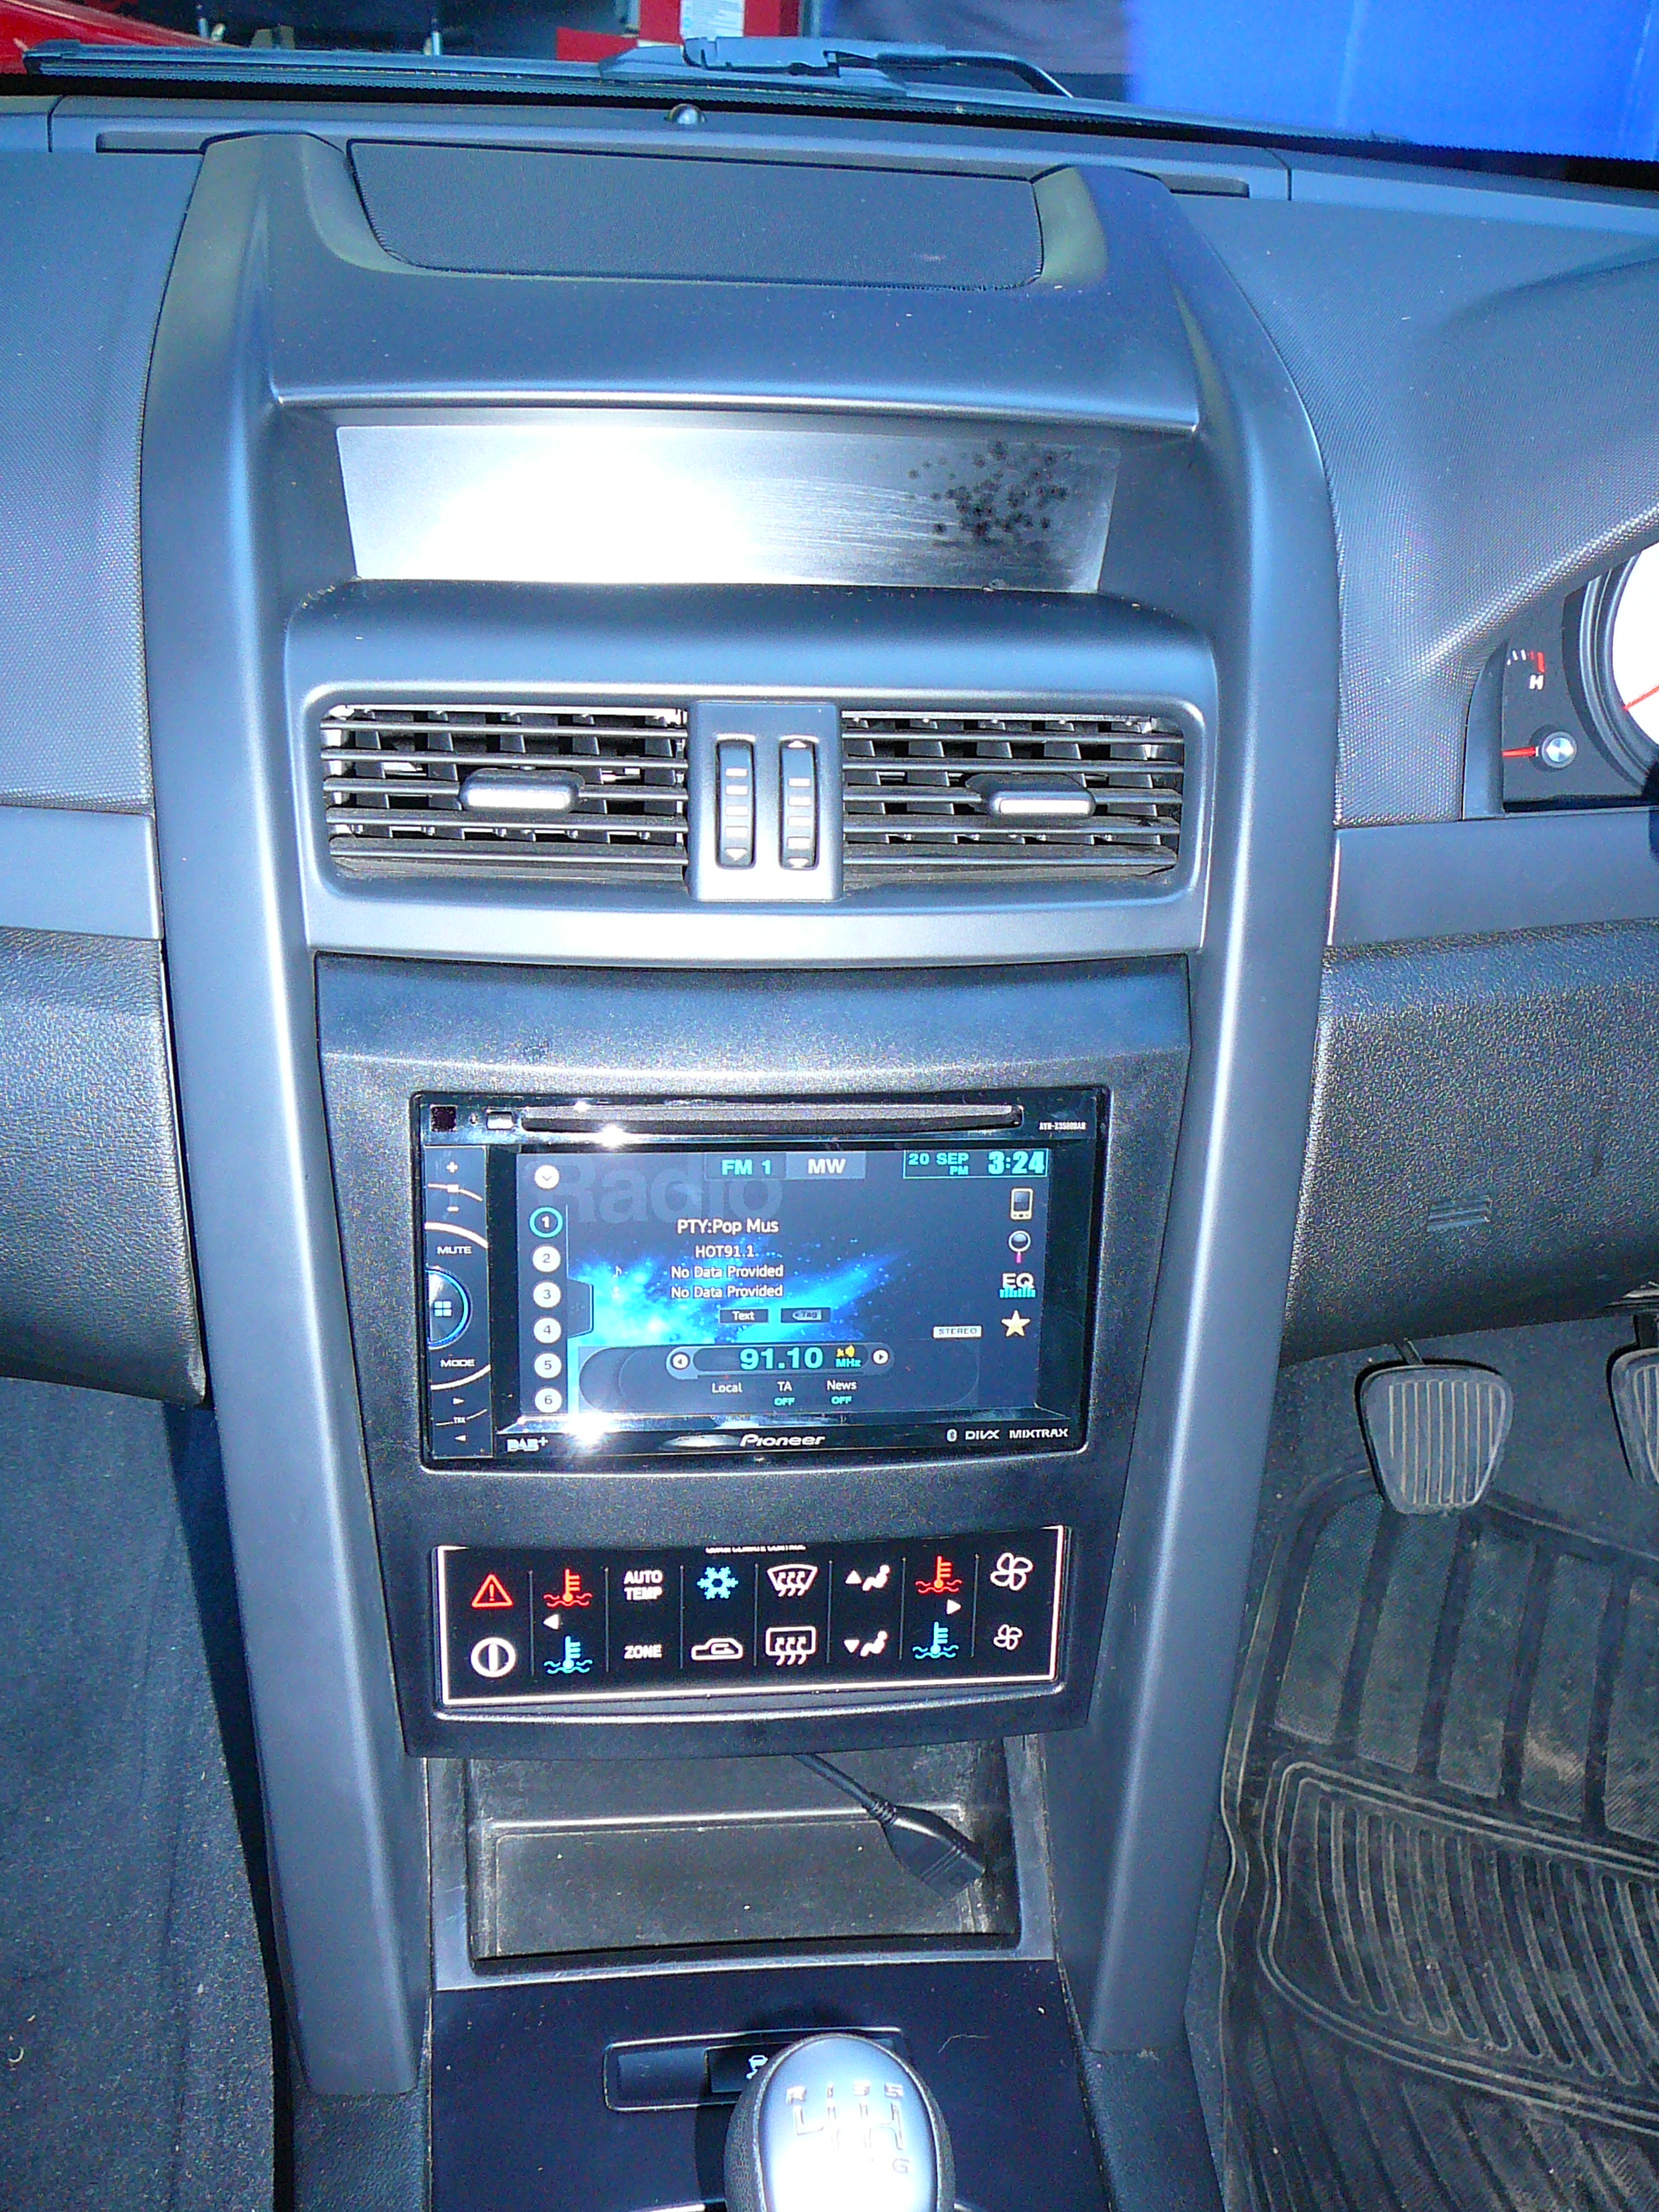 Holden VE Commodore, Pioneer AVH-X3500DAB with new Dash Fascia